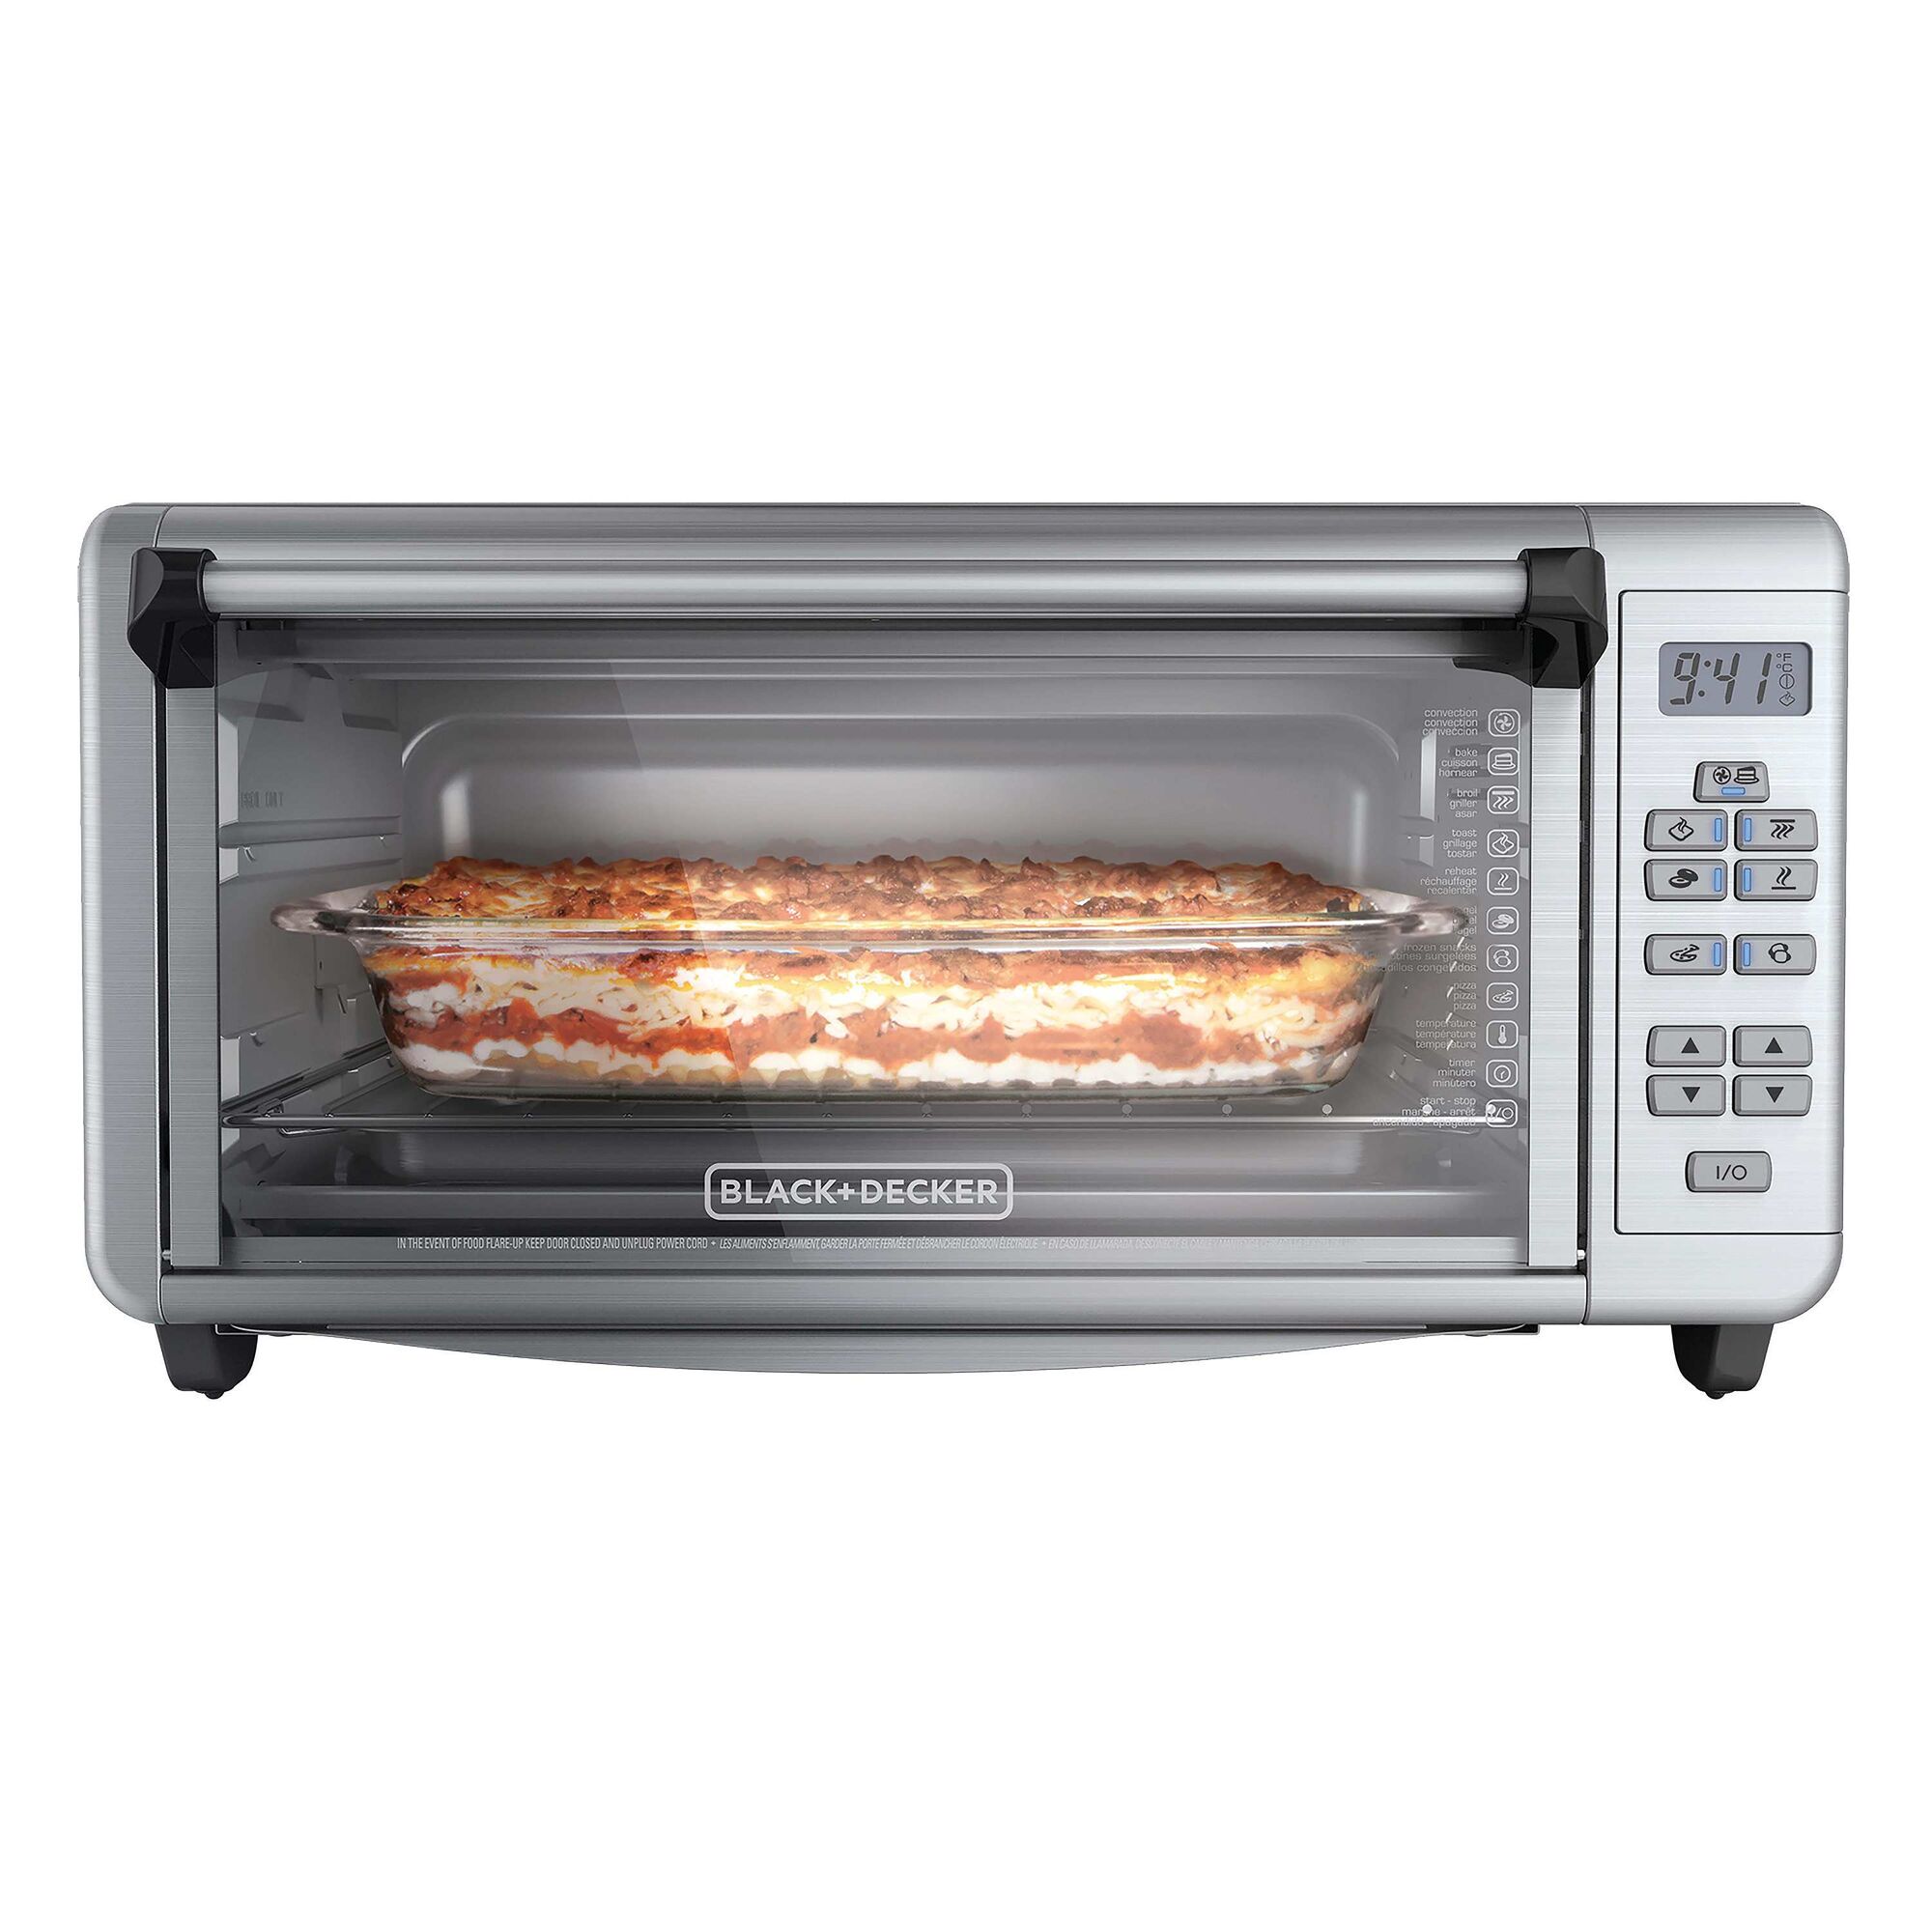 8 Slice Digital Extra-Wide Convection Oven.